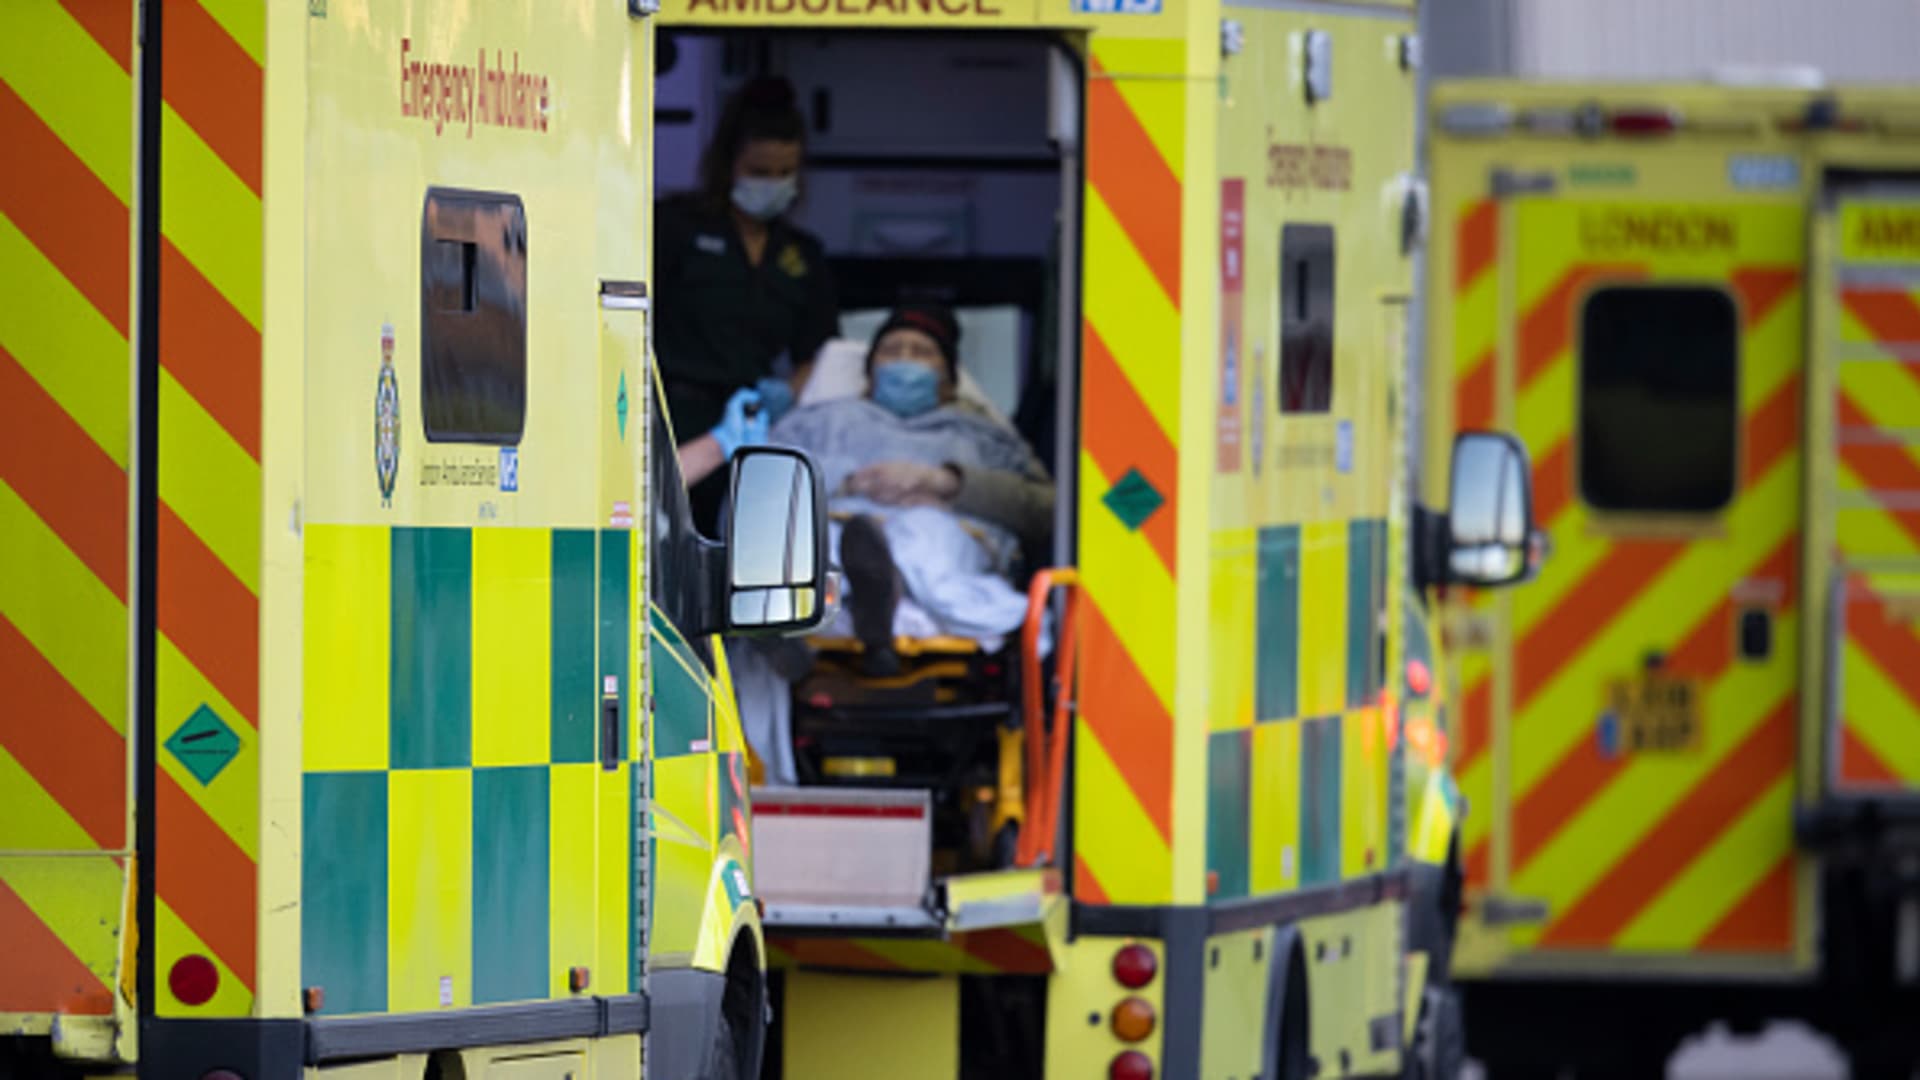 Patients arrive in ambulances at the Royal London Hospital, on January 05, 2021 in London, England. The British Prime Minister made a national television address on Monday evening announcing England is to enter its third lockdown of the covid-19 pandemic. This week the UK recorded more than 50,000 new confirmed Covid cases for the seventh day in a row.